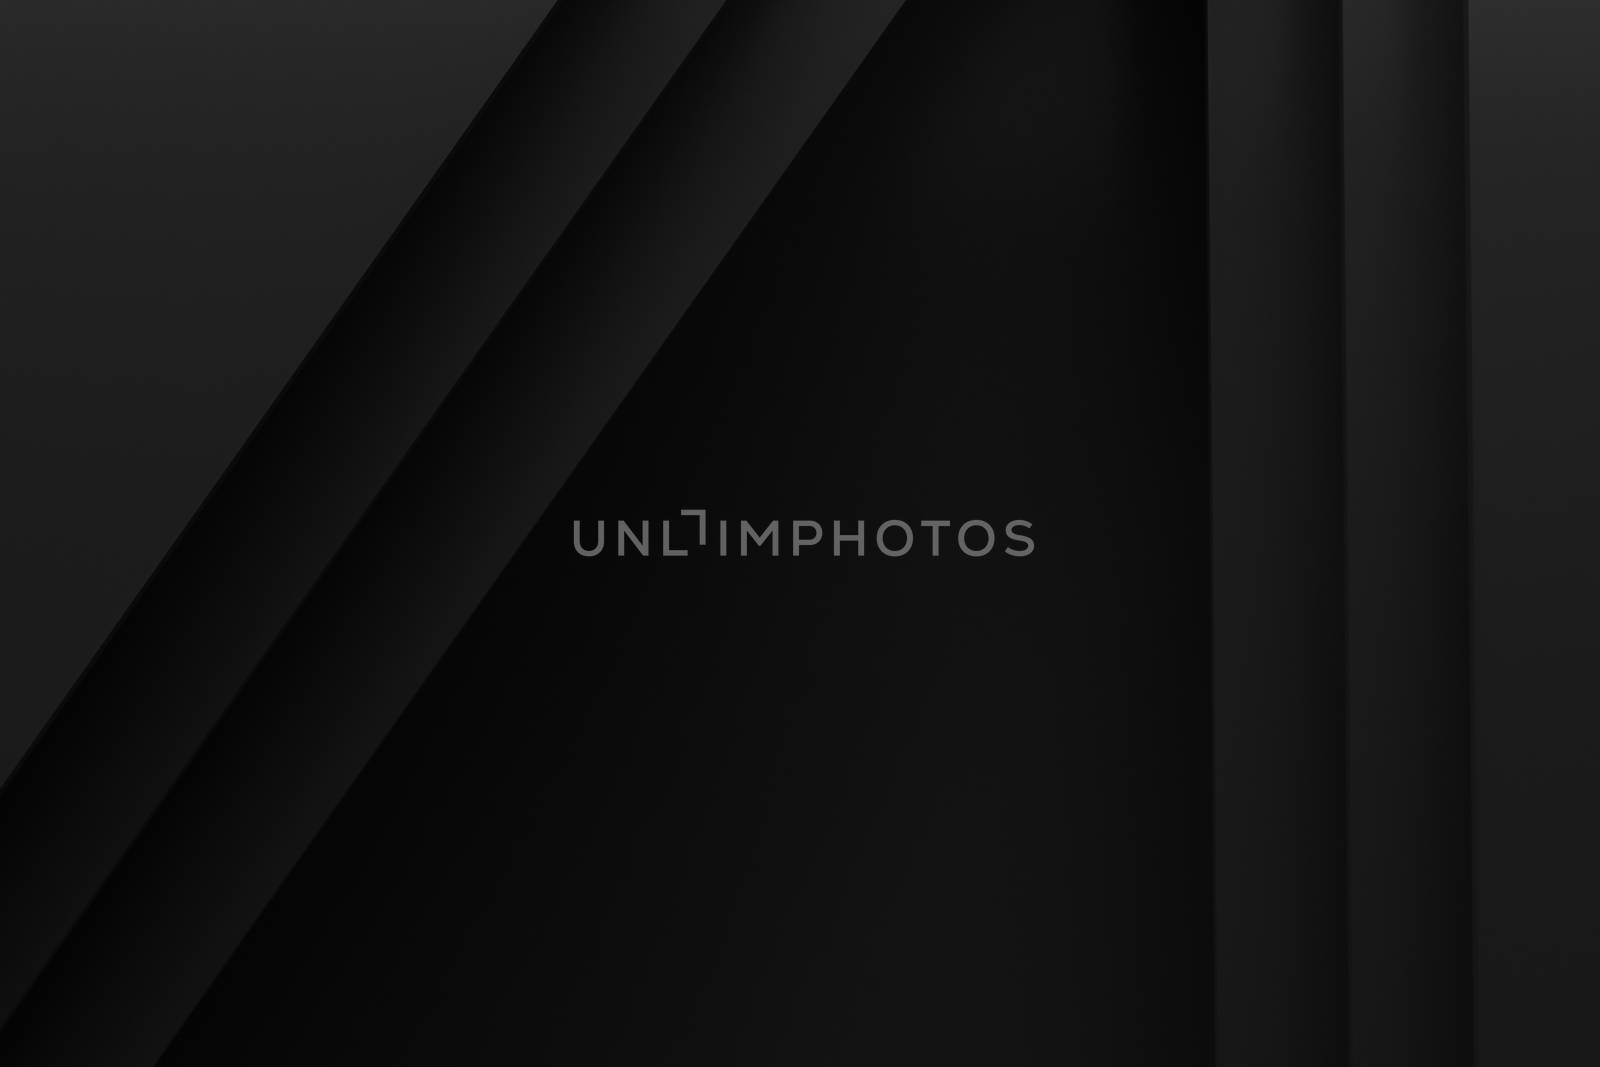 black layer layout paper material background 3d render